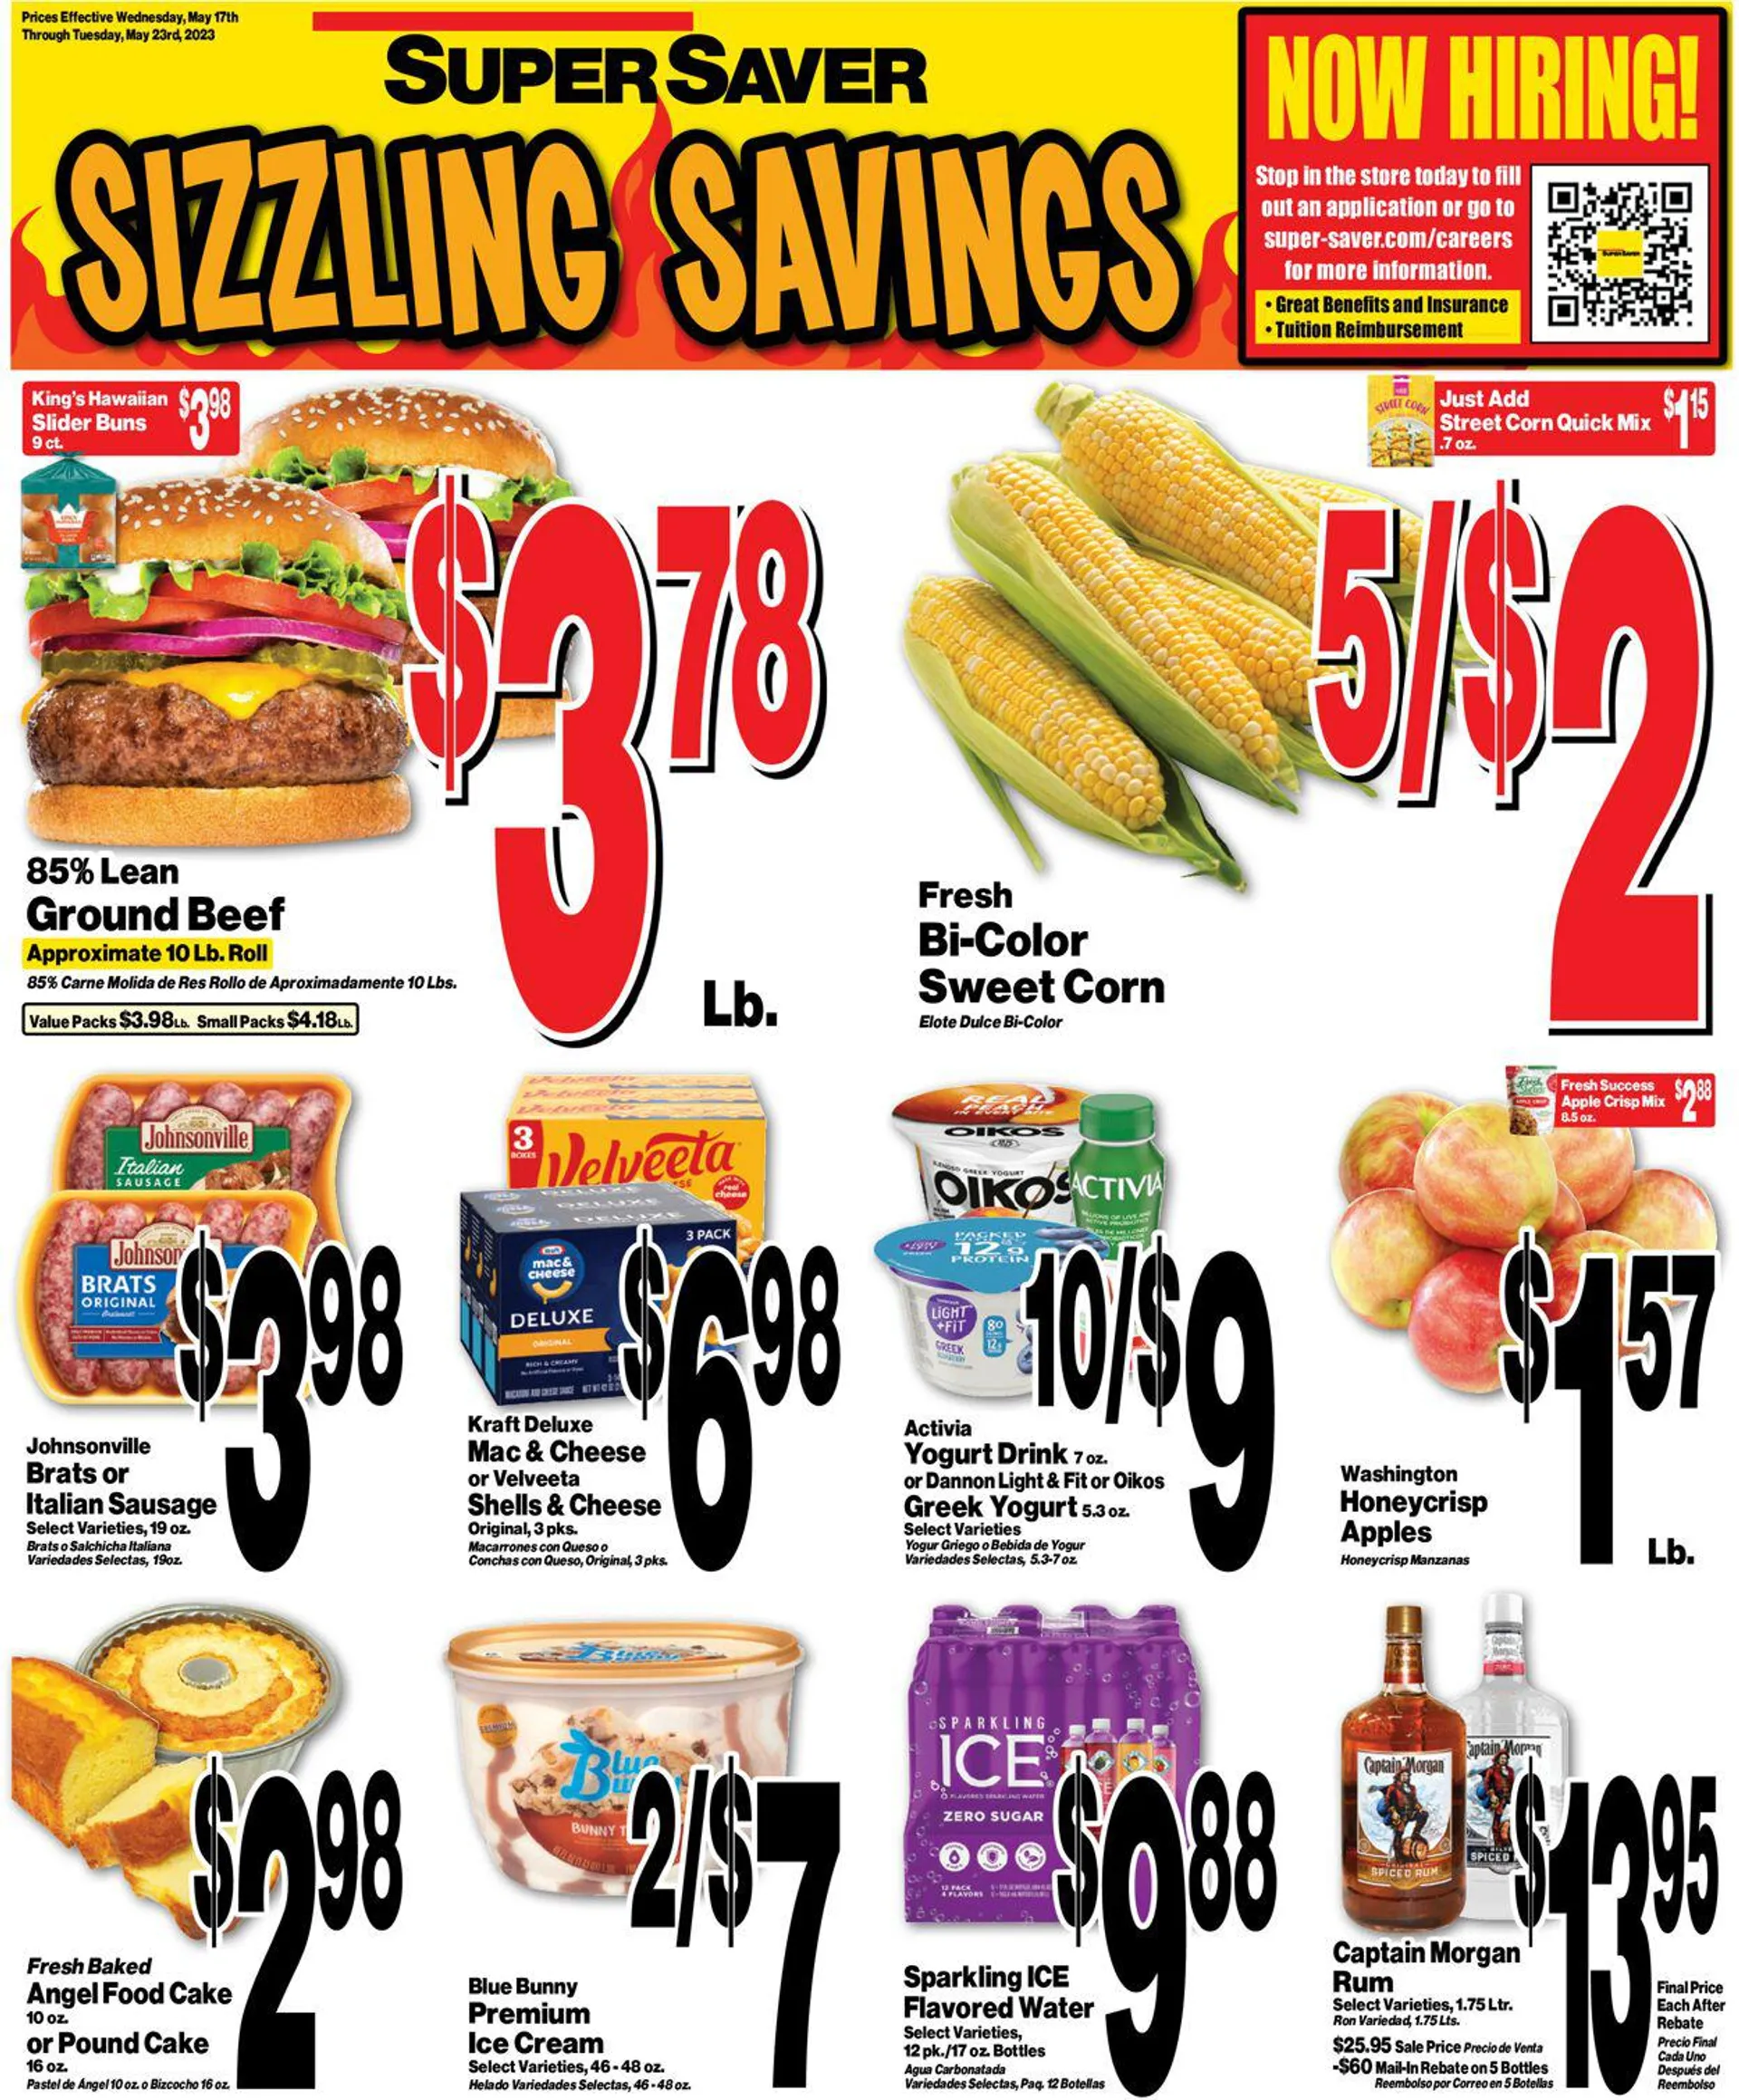 Super Saver Current weekly ad - 1